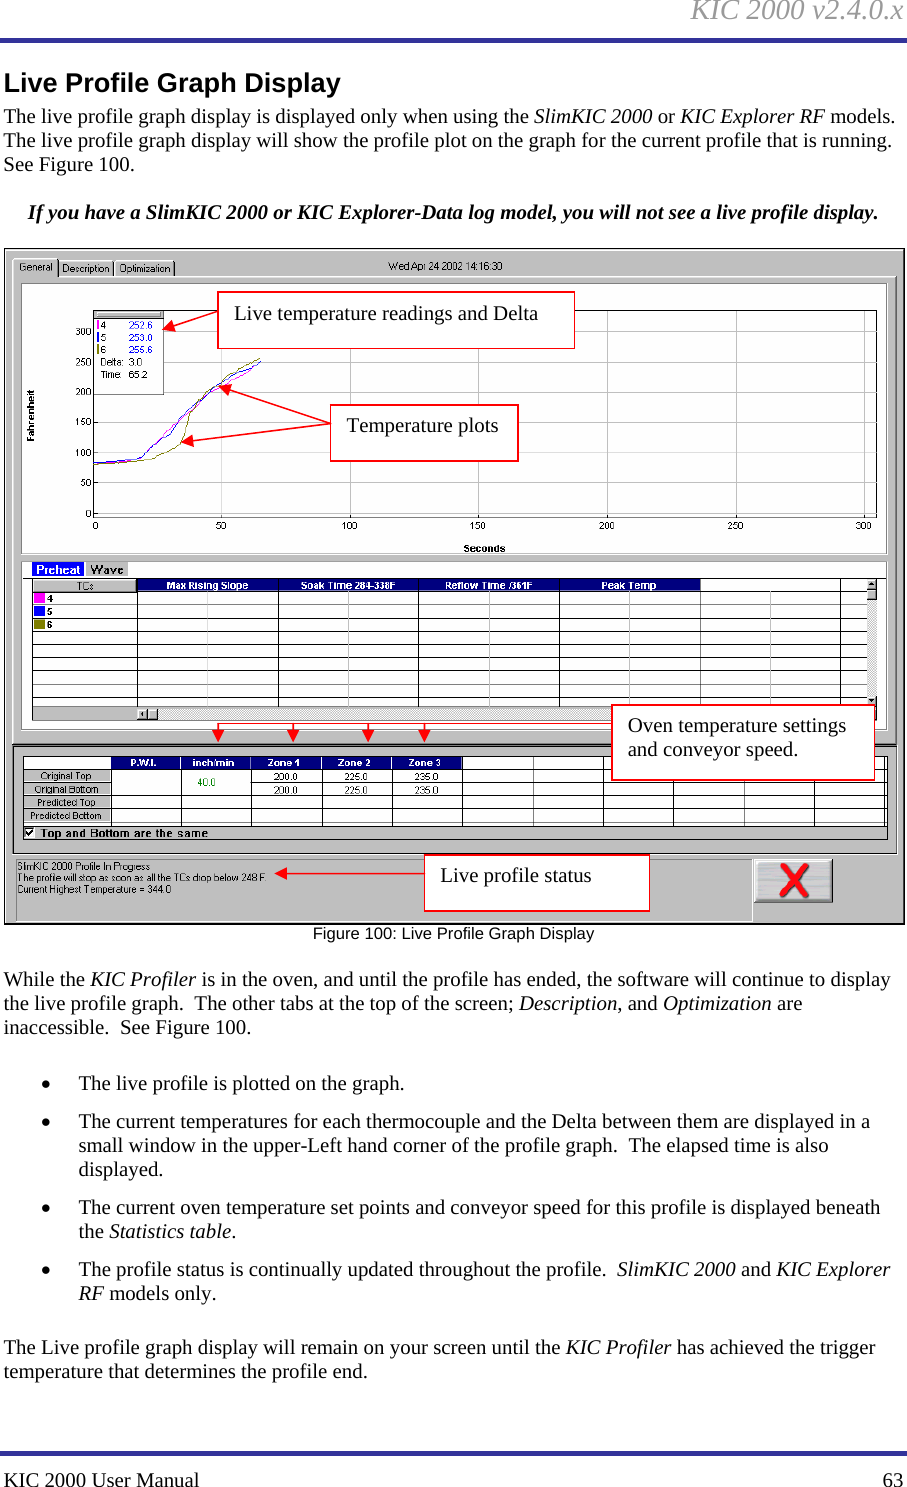 KIC 2000 v2.4.0.x KIC 2000 User Manual    63 Live Profile Graph Display The live profile graph display is displayed only when using the SlimKIC 2000 or KIC Explorer RF models.  The live profile graph display will show the profile plot on the graph for the current profile that is running.  See Figure 100.    If you have a SlimKIC 2000 or KIC Explorer-Data log model, you will not see a live profile display.   Figure 100: Live Profile Graph Display  While the KIC Profiler is in the oven, and until the profile has ended, the software will continue to display the live profile graph.  The other tabs at the top of the screen; Description, and Optimization are inaccessible.  See Figure 100.    • The live profile is plotted on the graph. • The current temperatures for each thermocouple and the Delta between them are displayed in a small window in the upper-Left hand corner of the profile graph.  The elapsed time is also displayed. • The current oven temperature set points and conveyor speed for this profile is displayed beneath the Statistics table. • The profile status is continually updated throughout the profile.  SlimKIC 2000 and KIC Explorer RF models only.  The Live profile graph display will remain on your screen until the KIC Profiler has achieved the trigger temperature that determines the profile end.  Temperature plots Oven temperature settings and conveyor speed. Live profile status Live temperature readings and Delta 